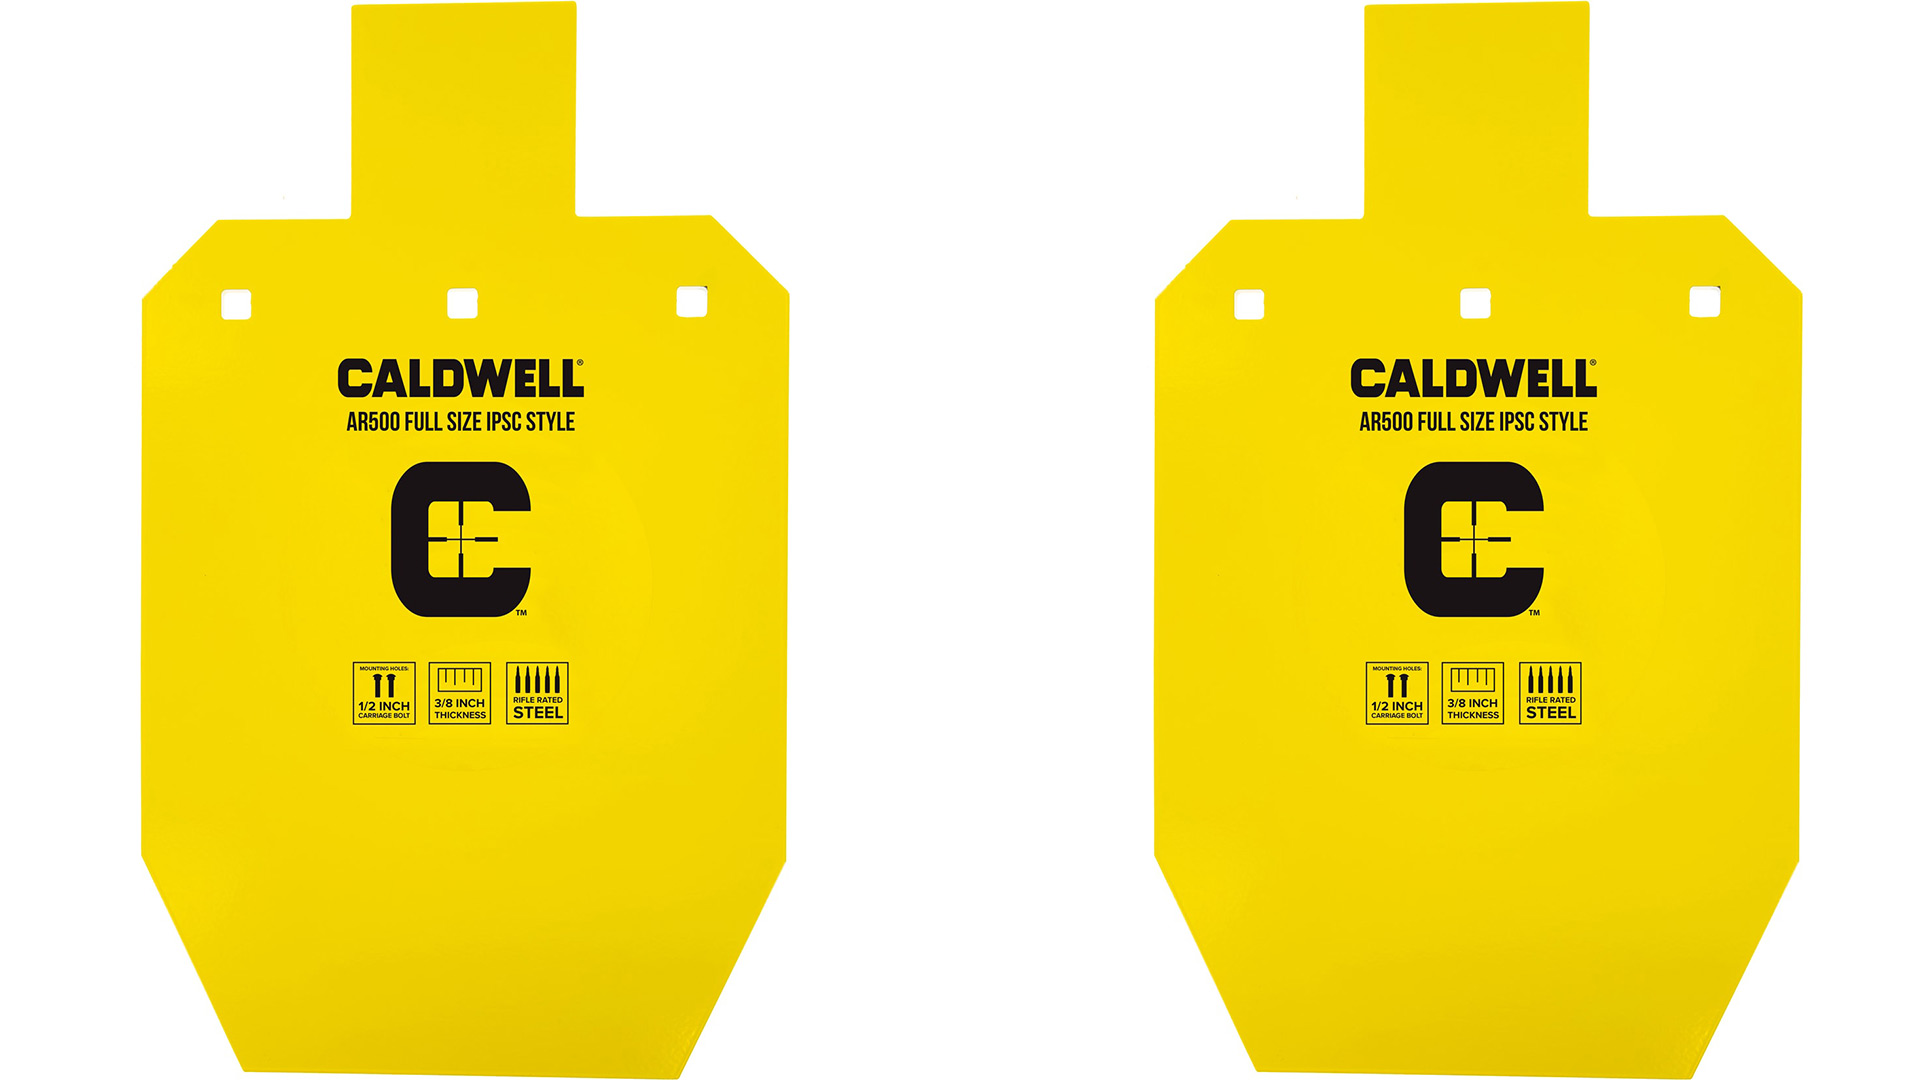 Caldwell IPSC Steel Target | Full Size